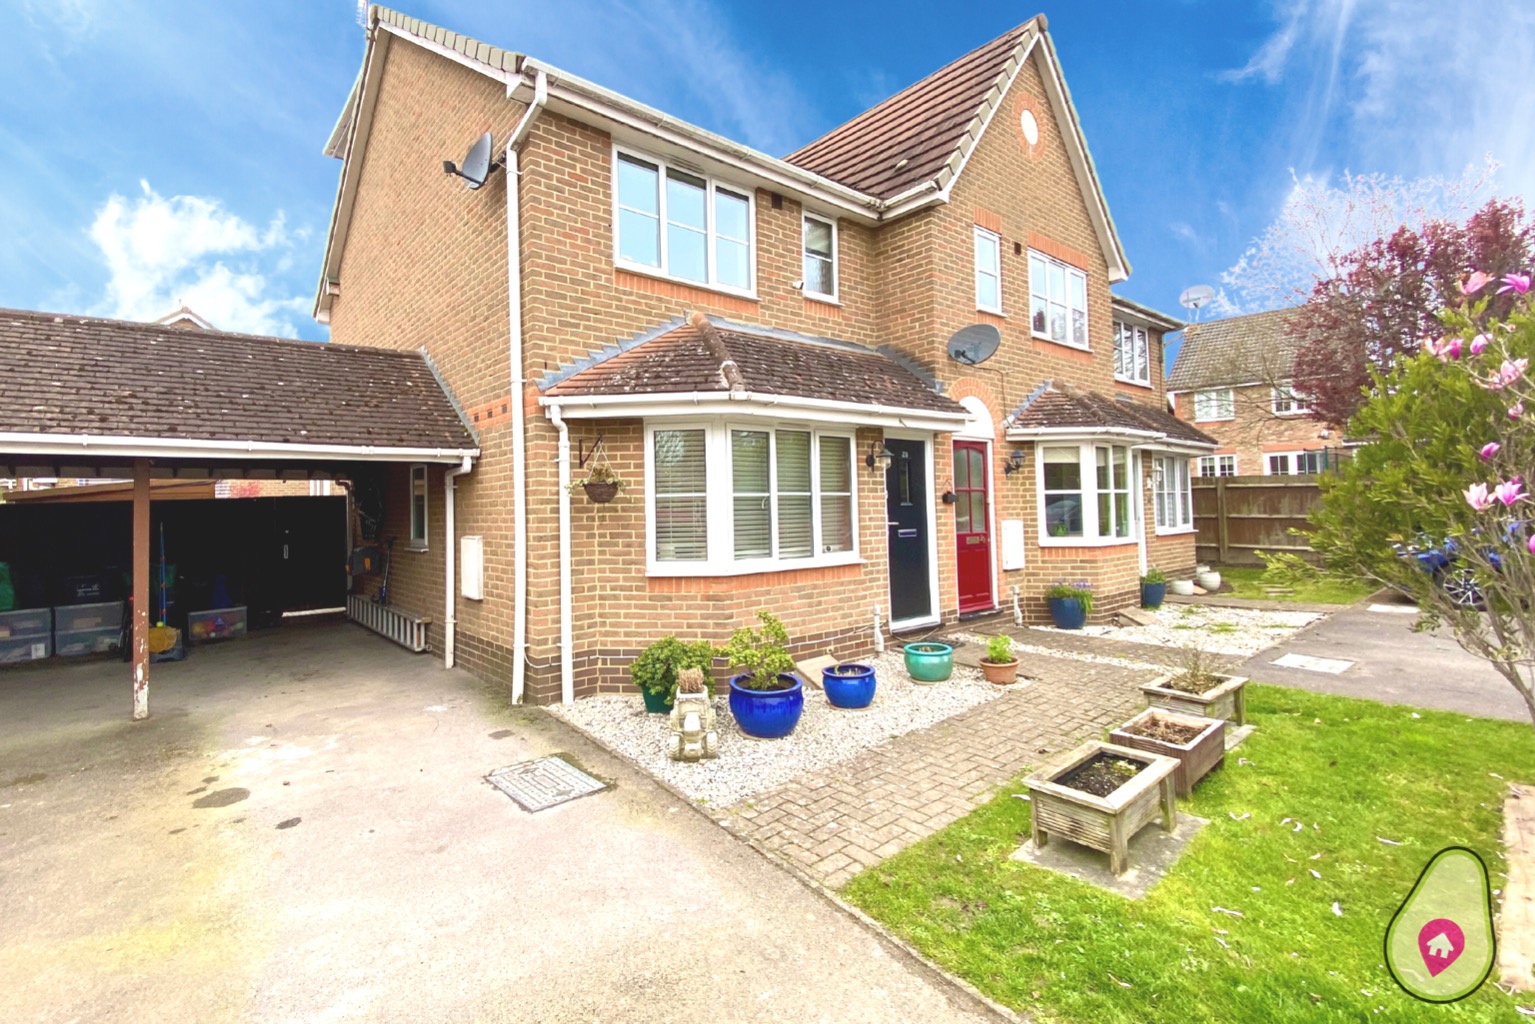 Built by T.A Fisher in the early nineties this family home is really well situated and offers ample living space with a loft conversion and conservatory.